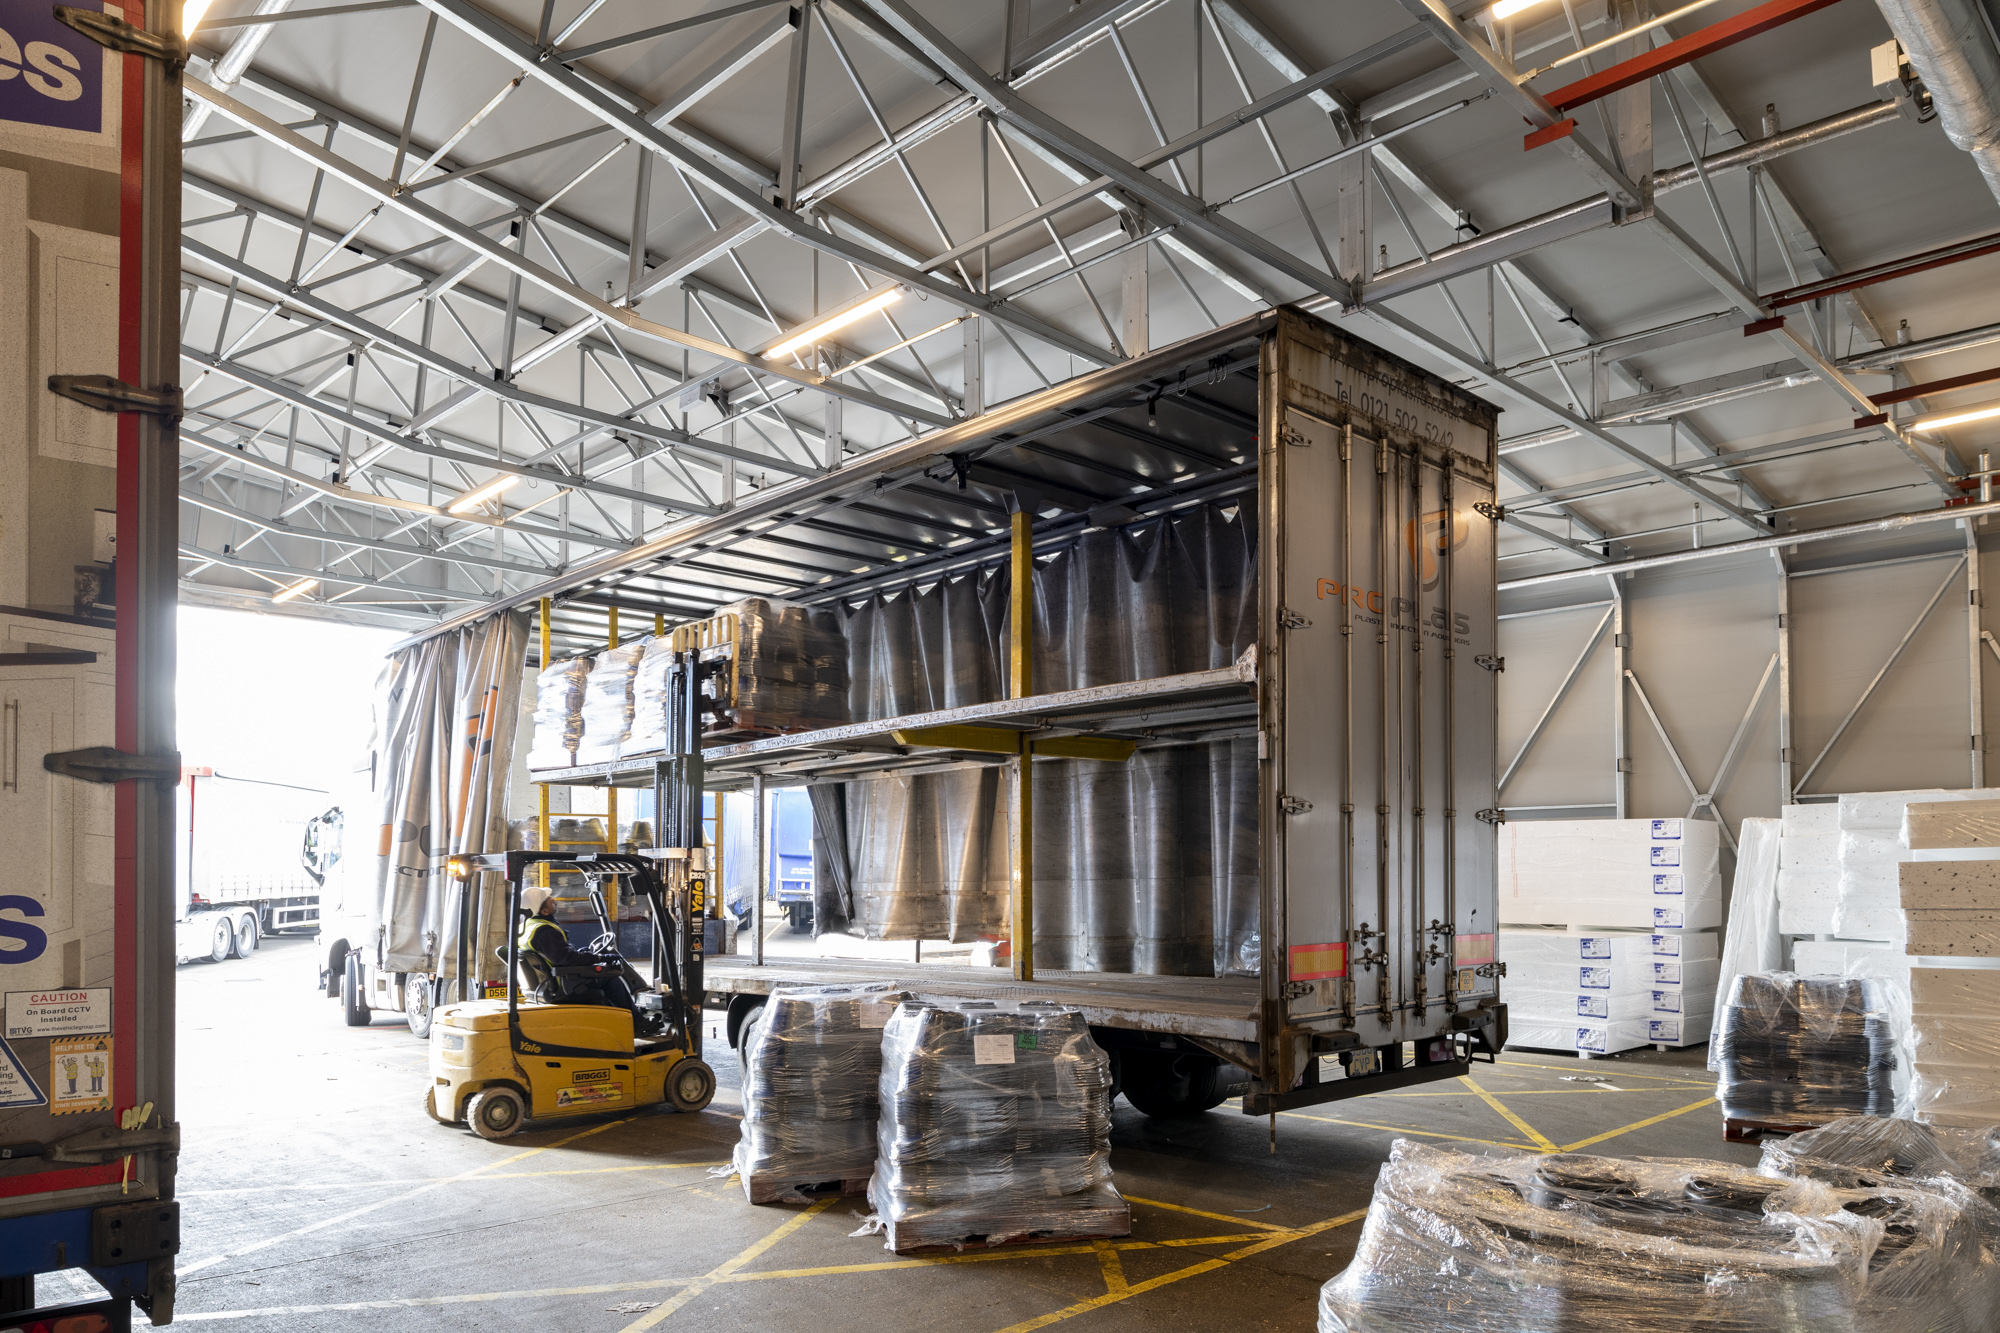 Temporary industrial buildings offer flexible solutions to industrial requirements